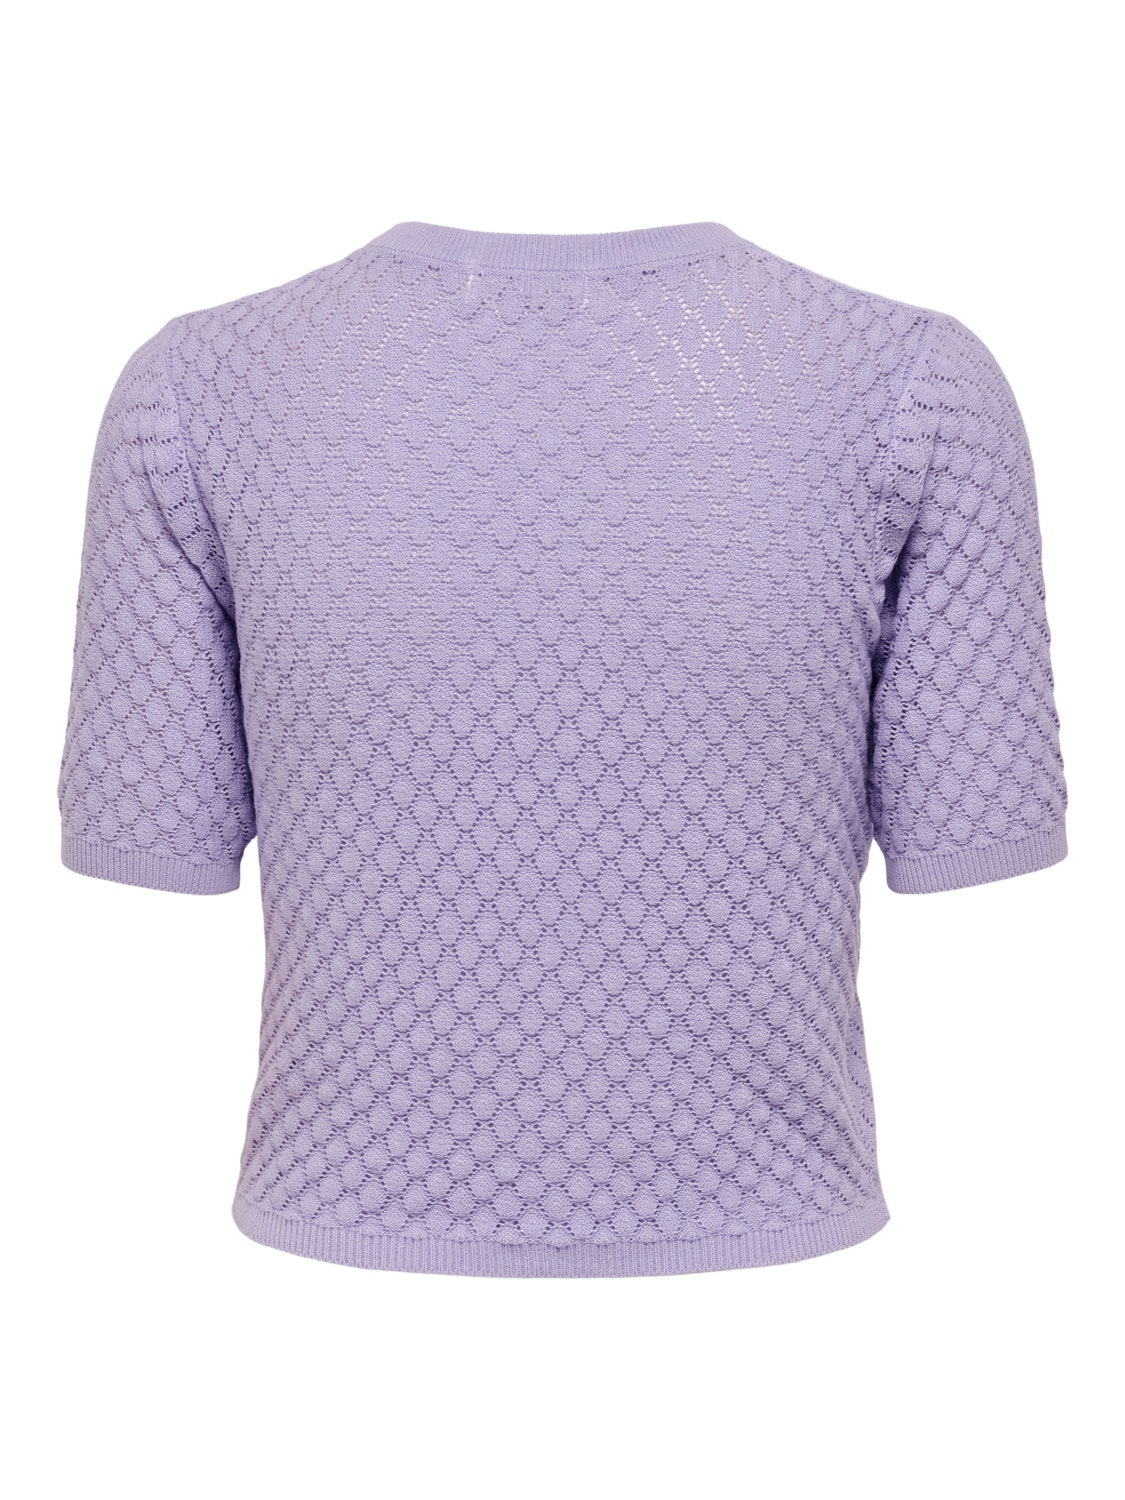 ONLY Short sleeved Knitted Pullover -Lavender - 15254360